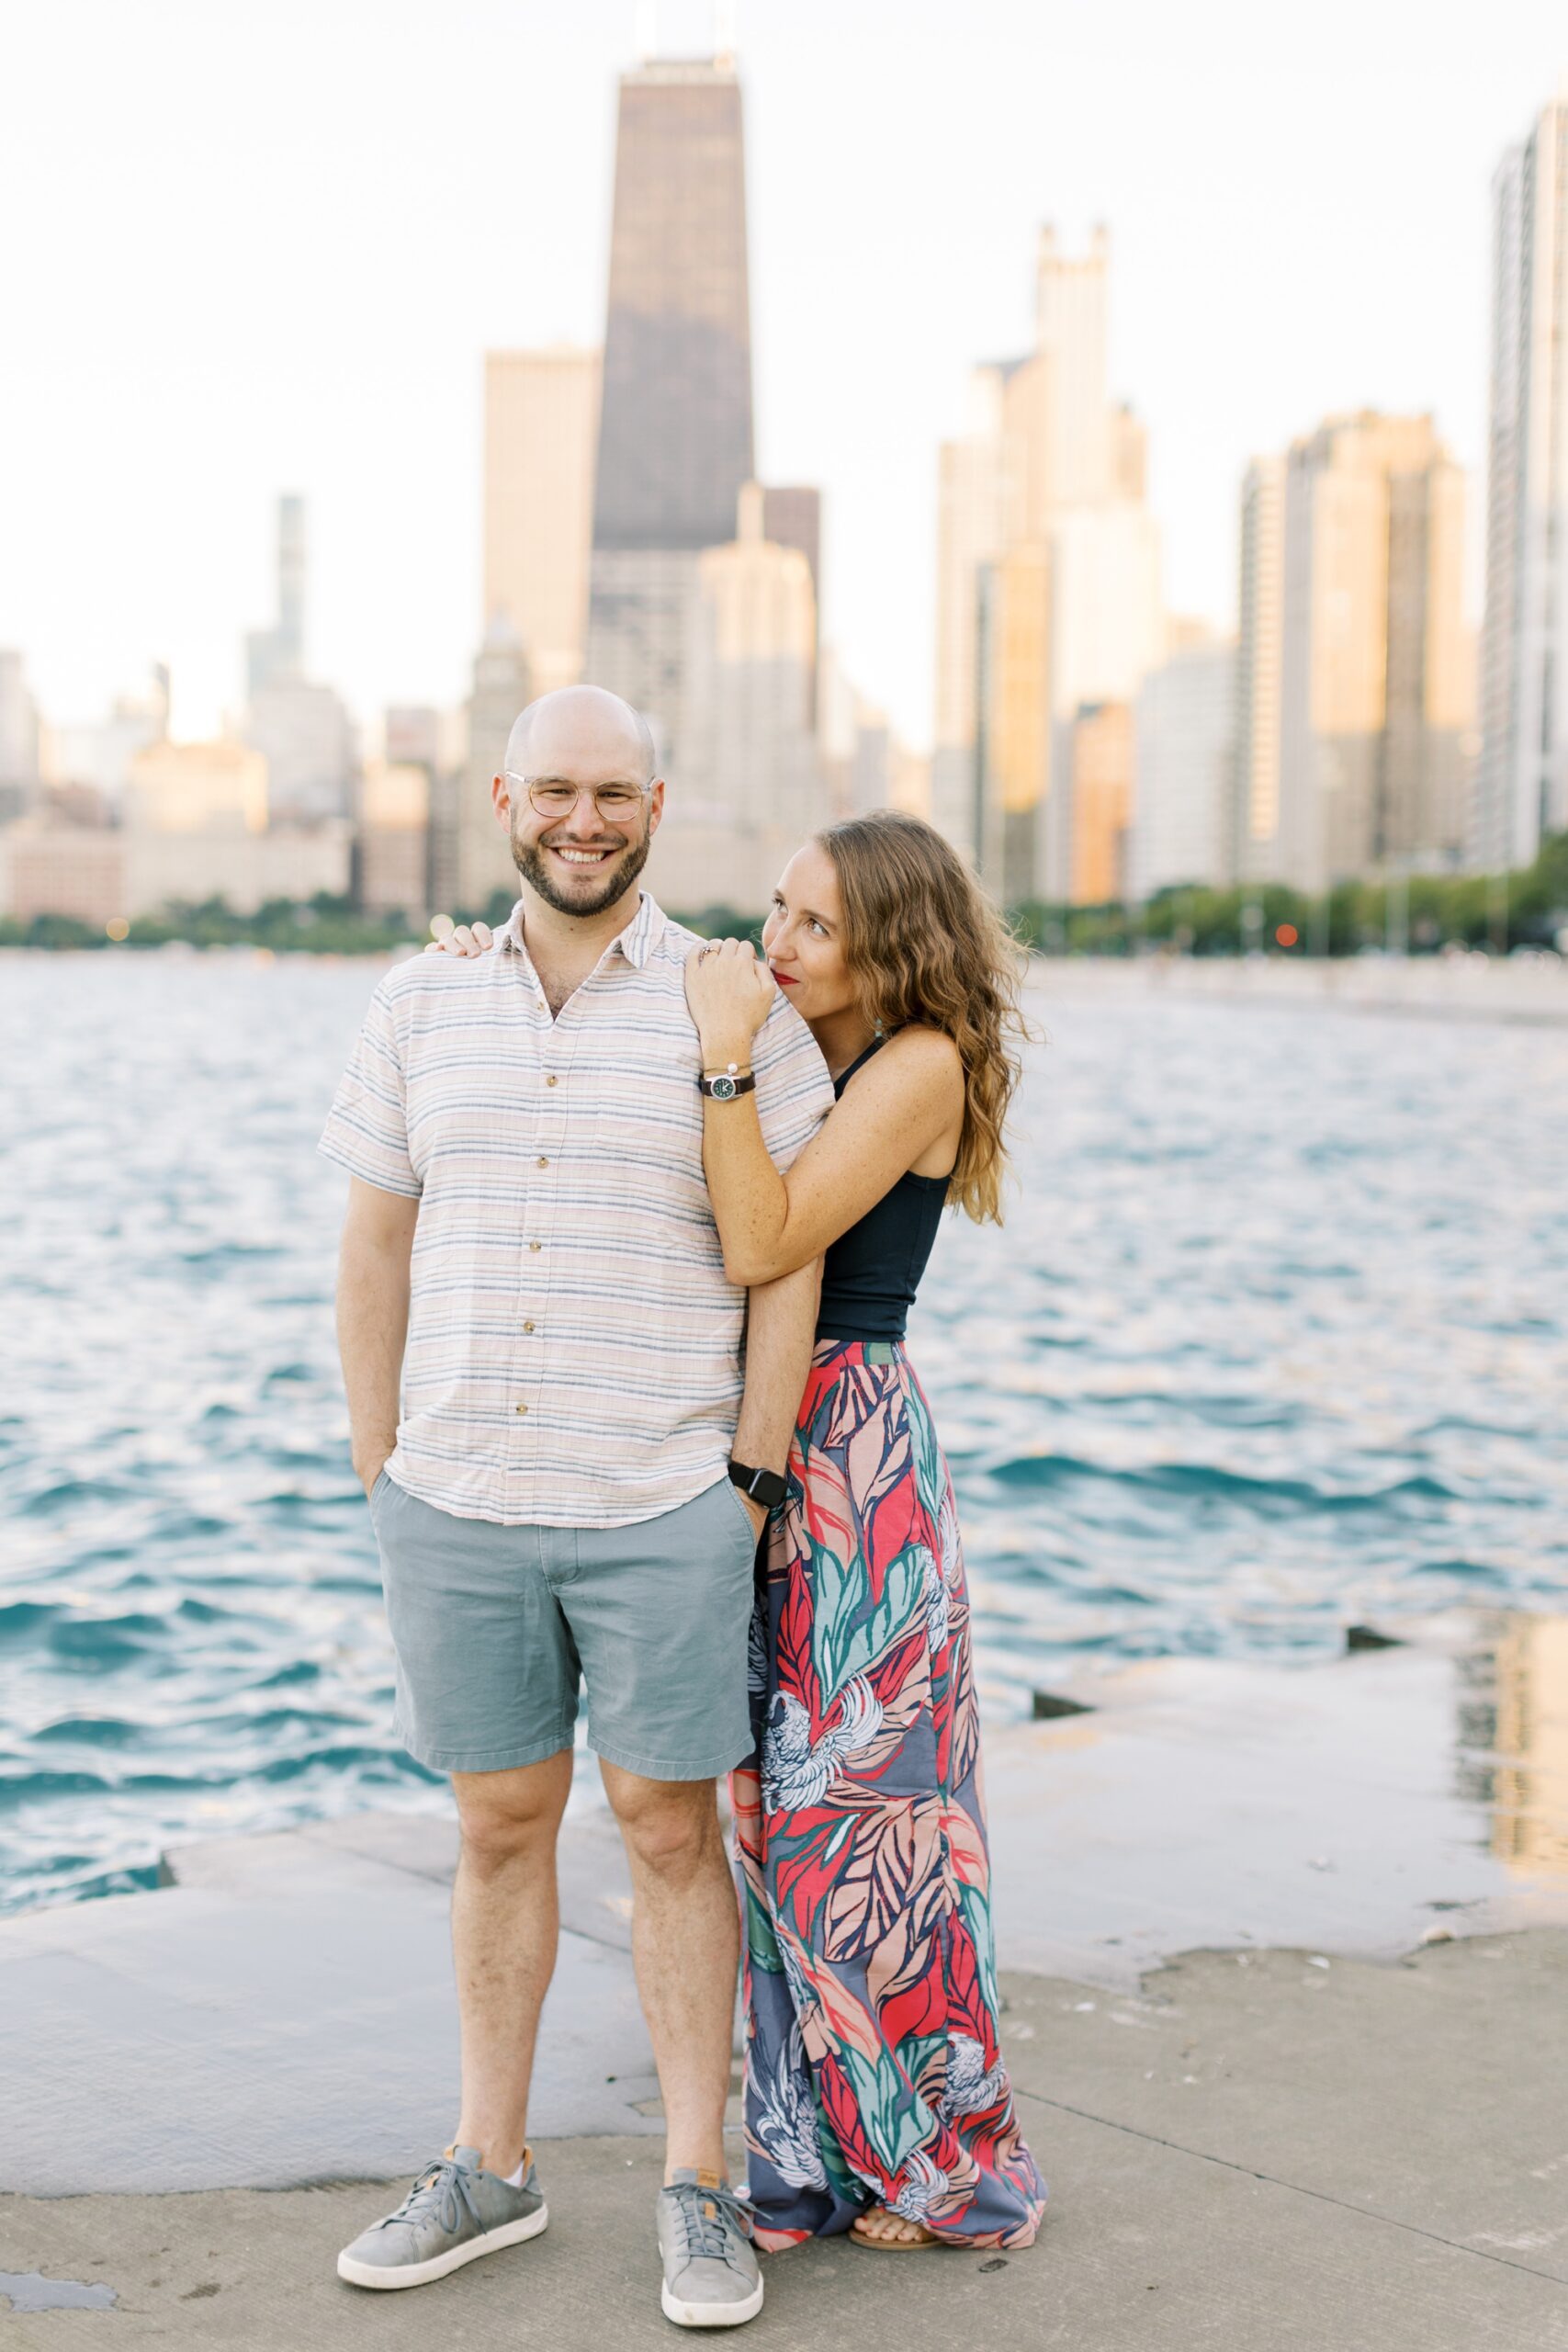 The couple smiled at each other during the Chicago skyline engagement photoshoot